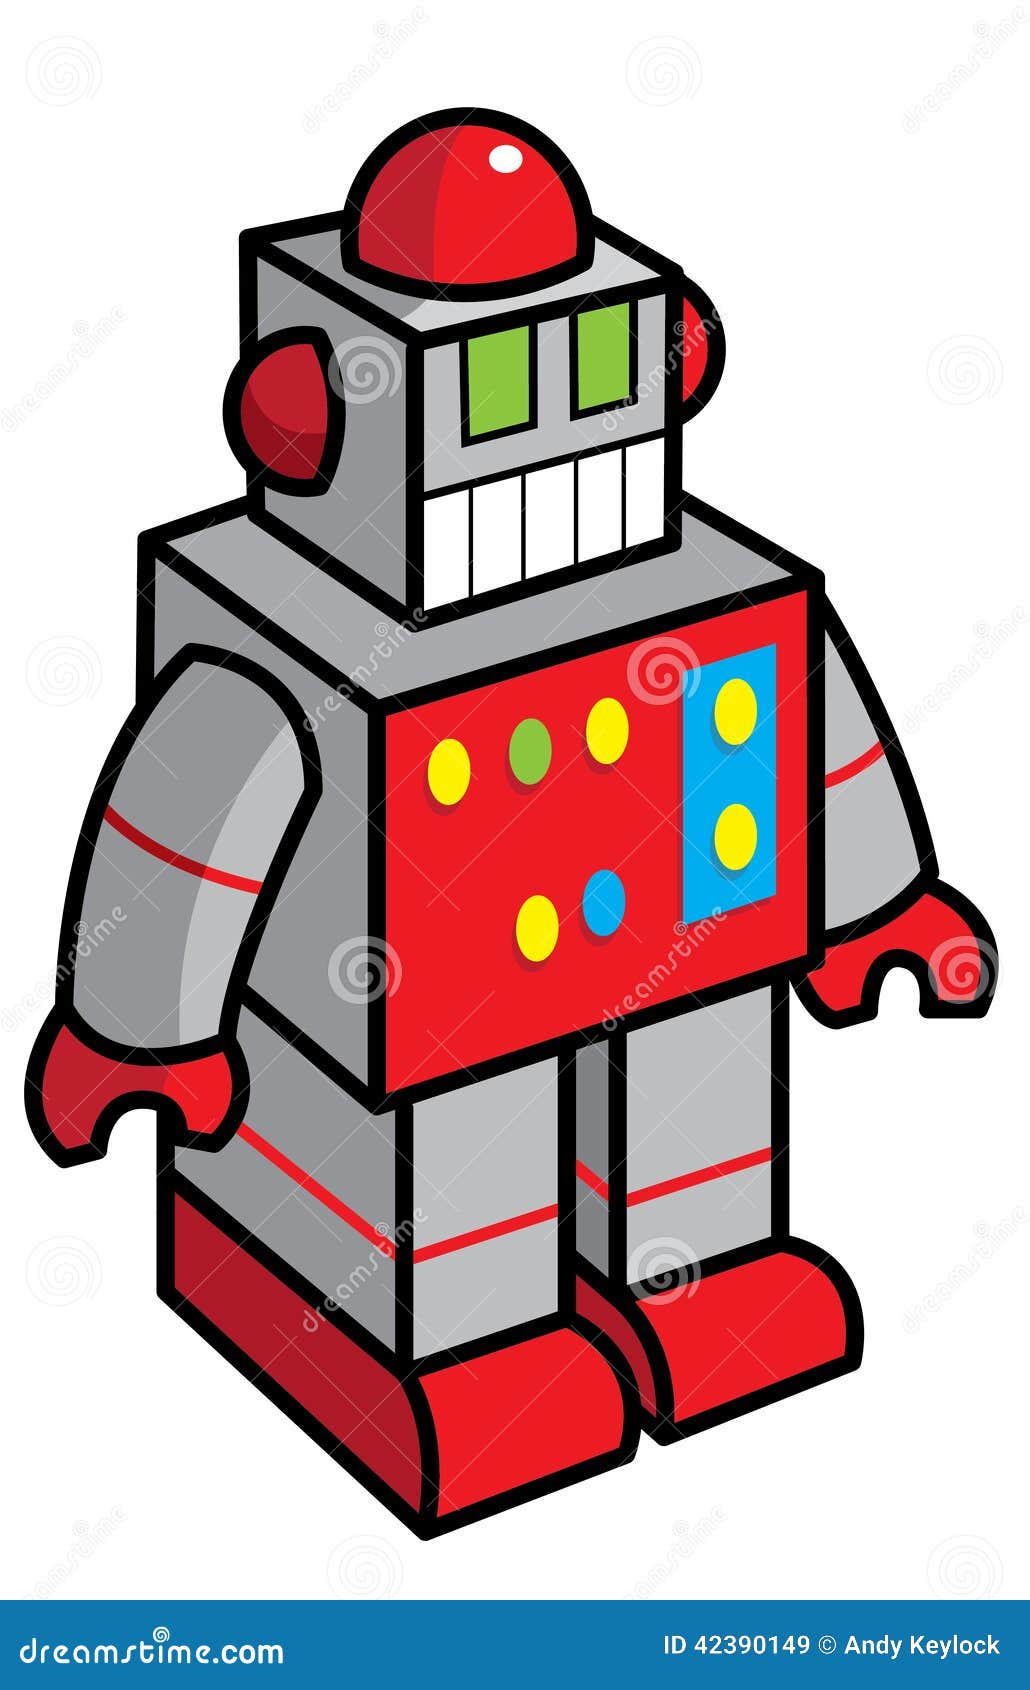 Toy Robot Illustration Stock Vector Image 42390149